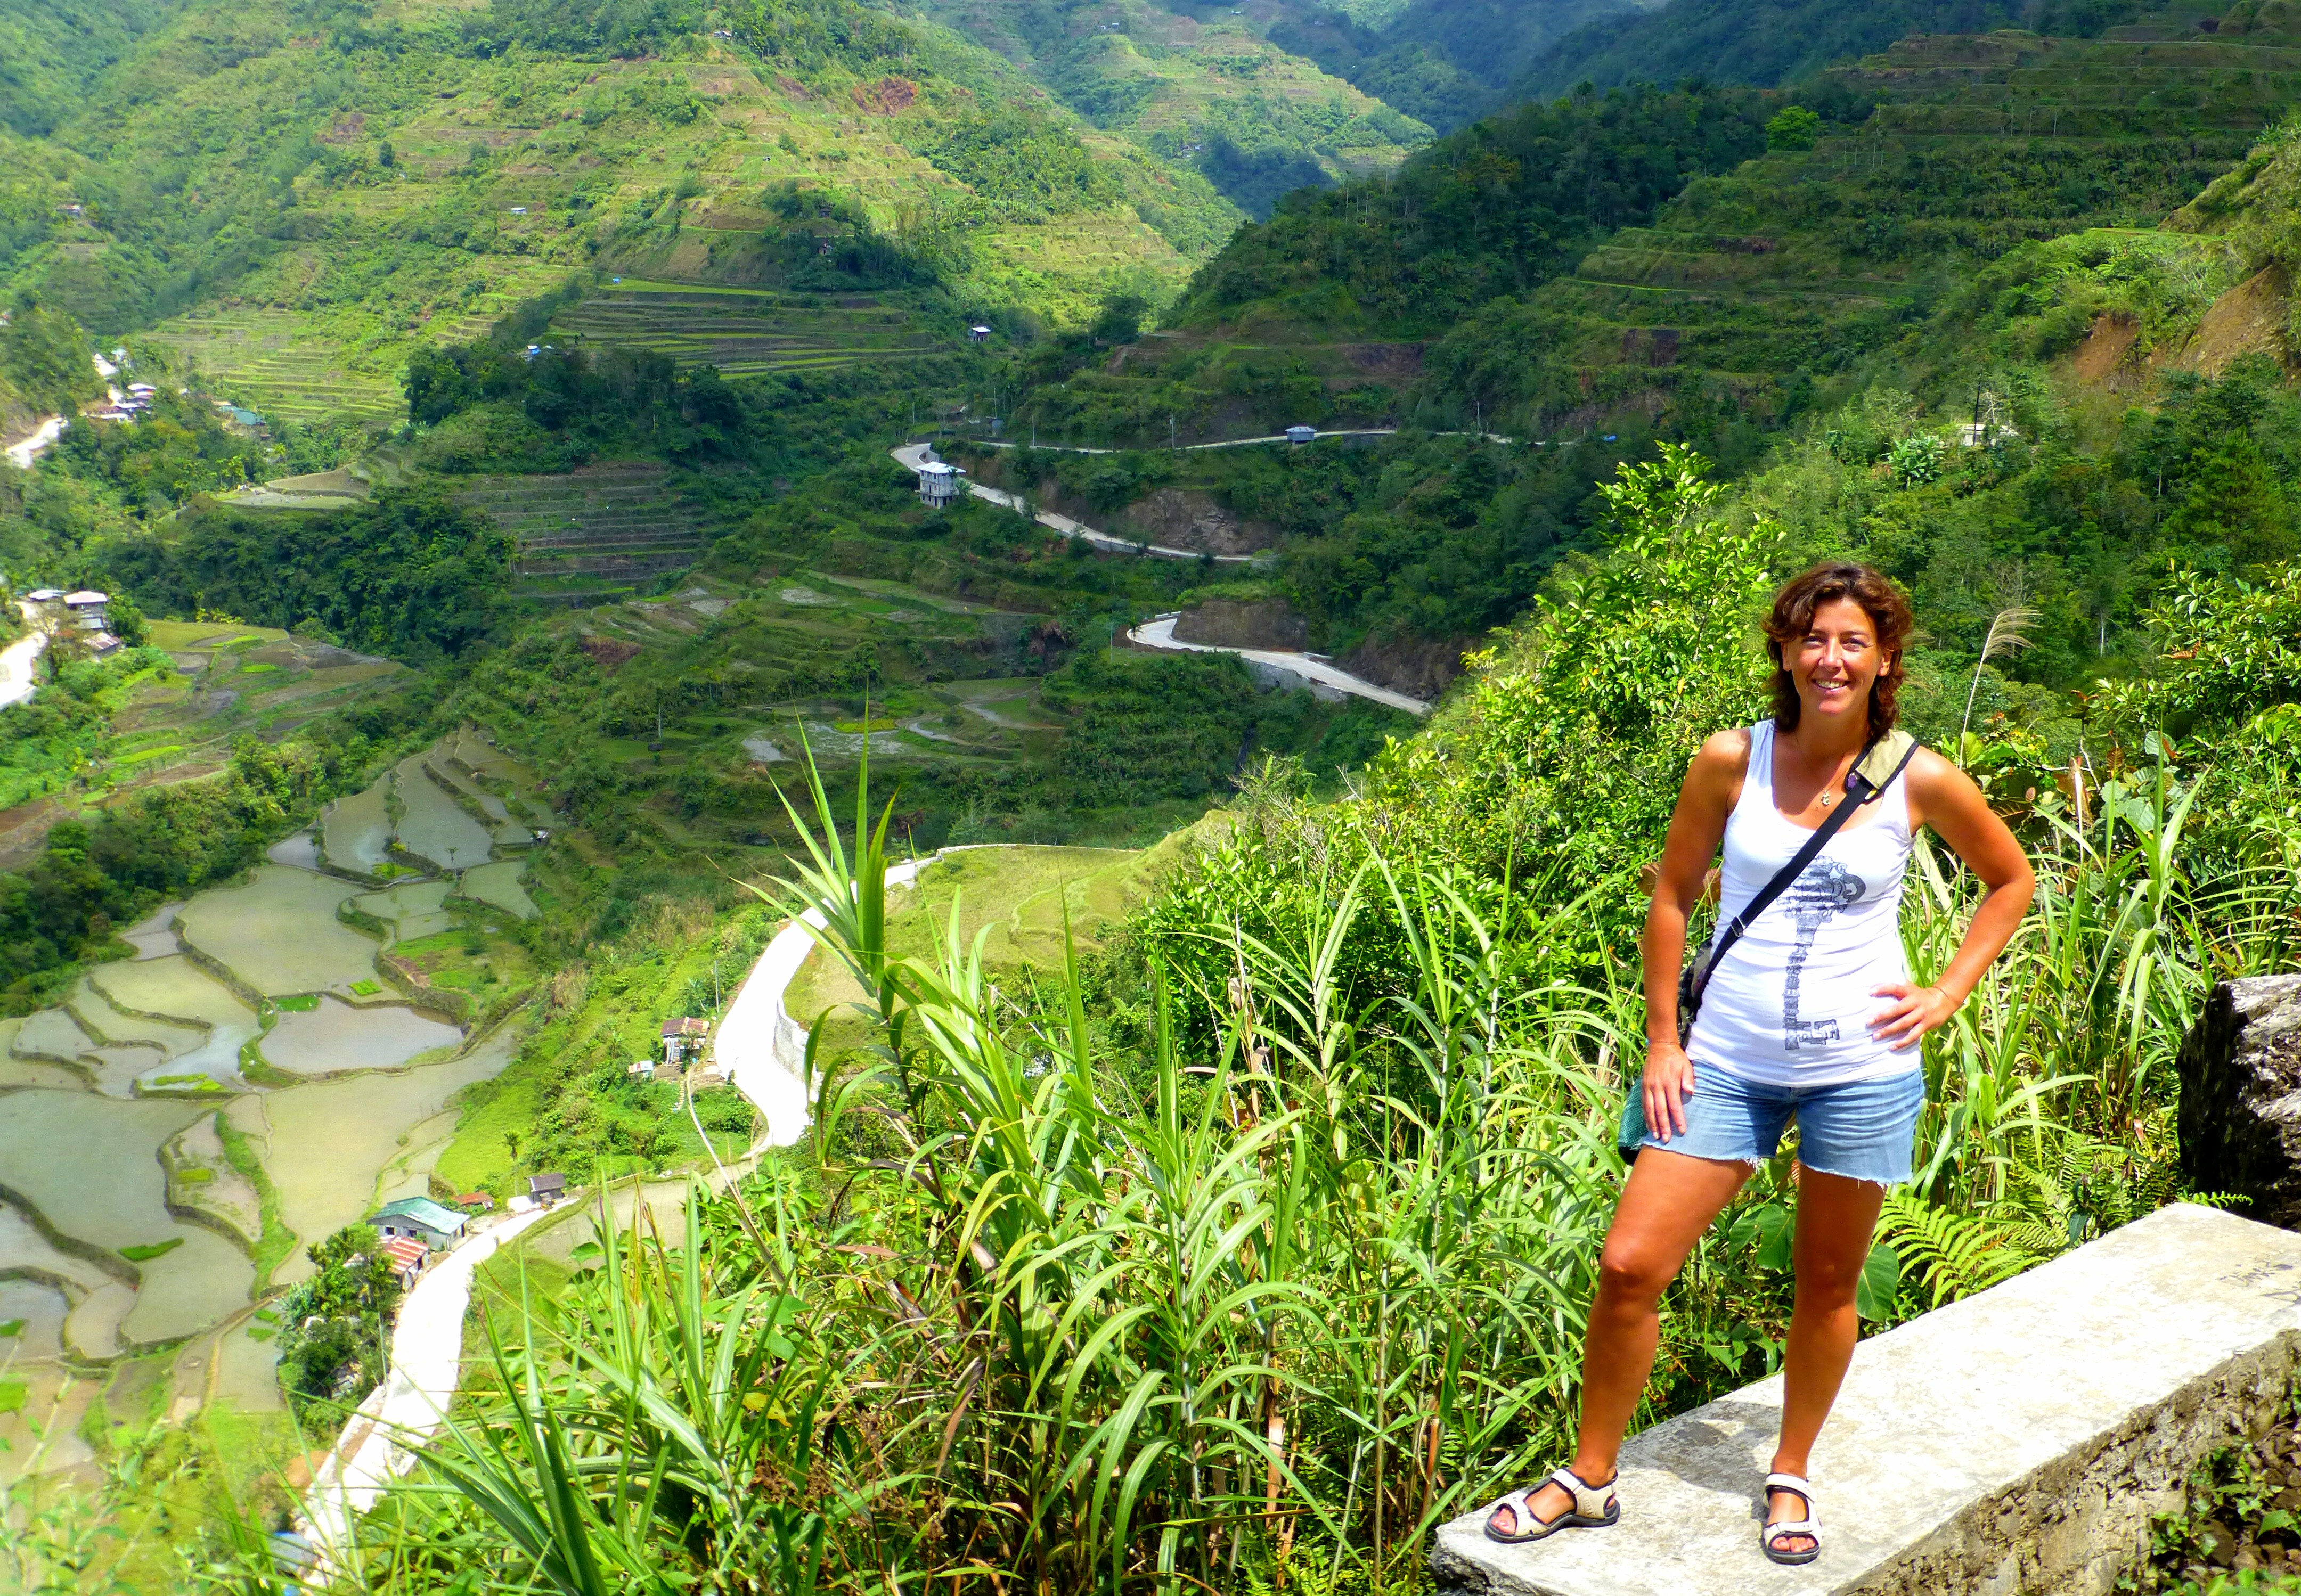 Visiting those Ancient Old Riceterraces - Banaue / Hapao